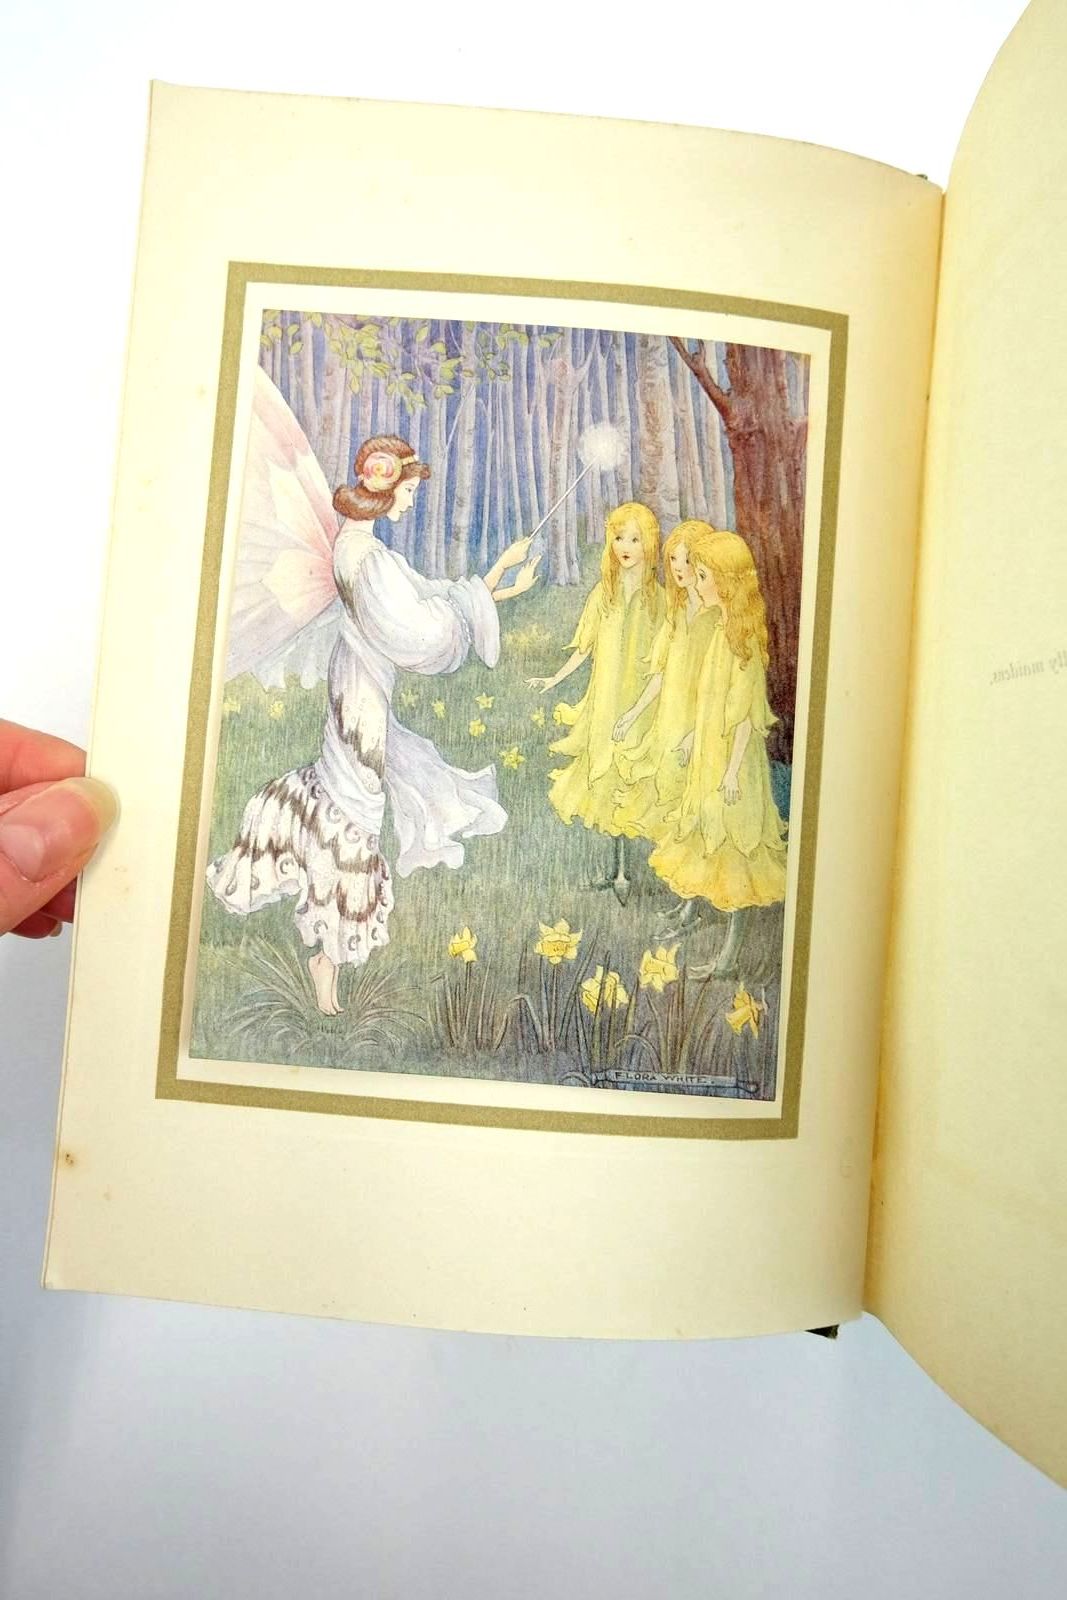 Photo of STORIES TOLD TO CHILDREN written by Fairless, Michael illustrated by White, Flora published by Duckworth & Co. (STOCK CODE: 2135604)  for sale by Stella & Rose's Books